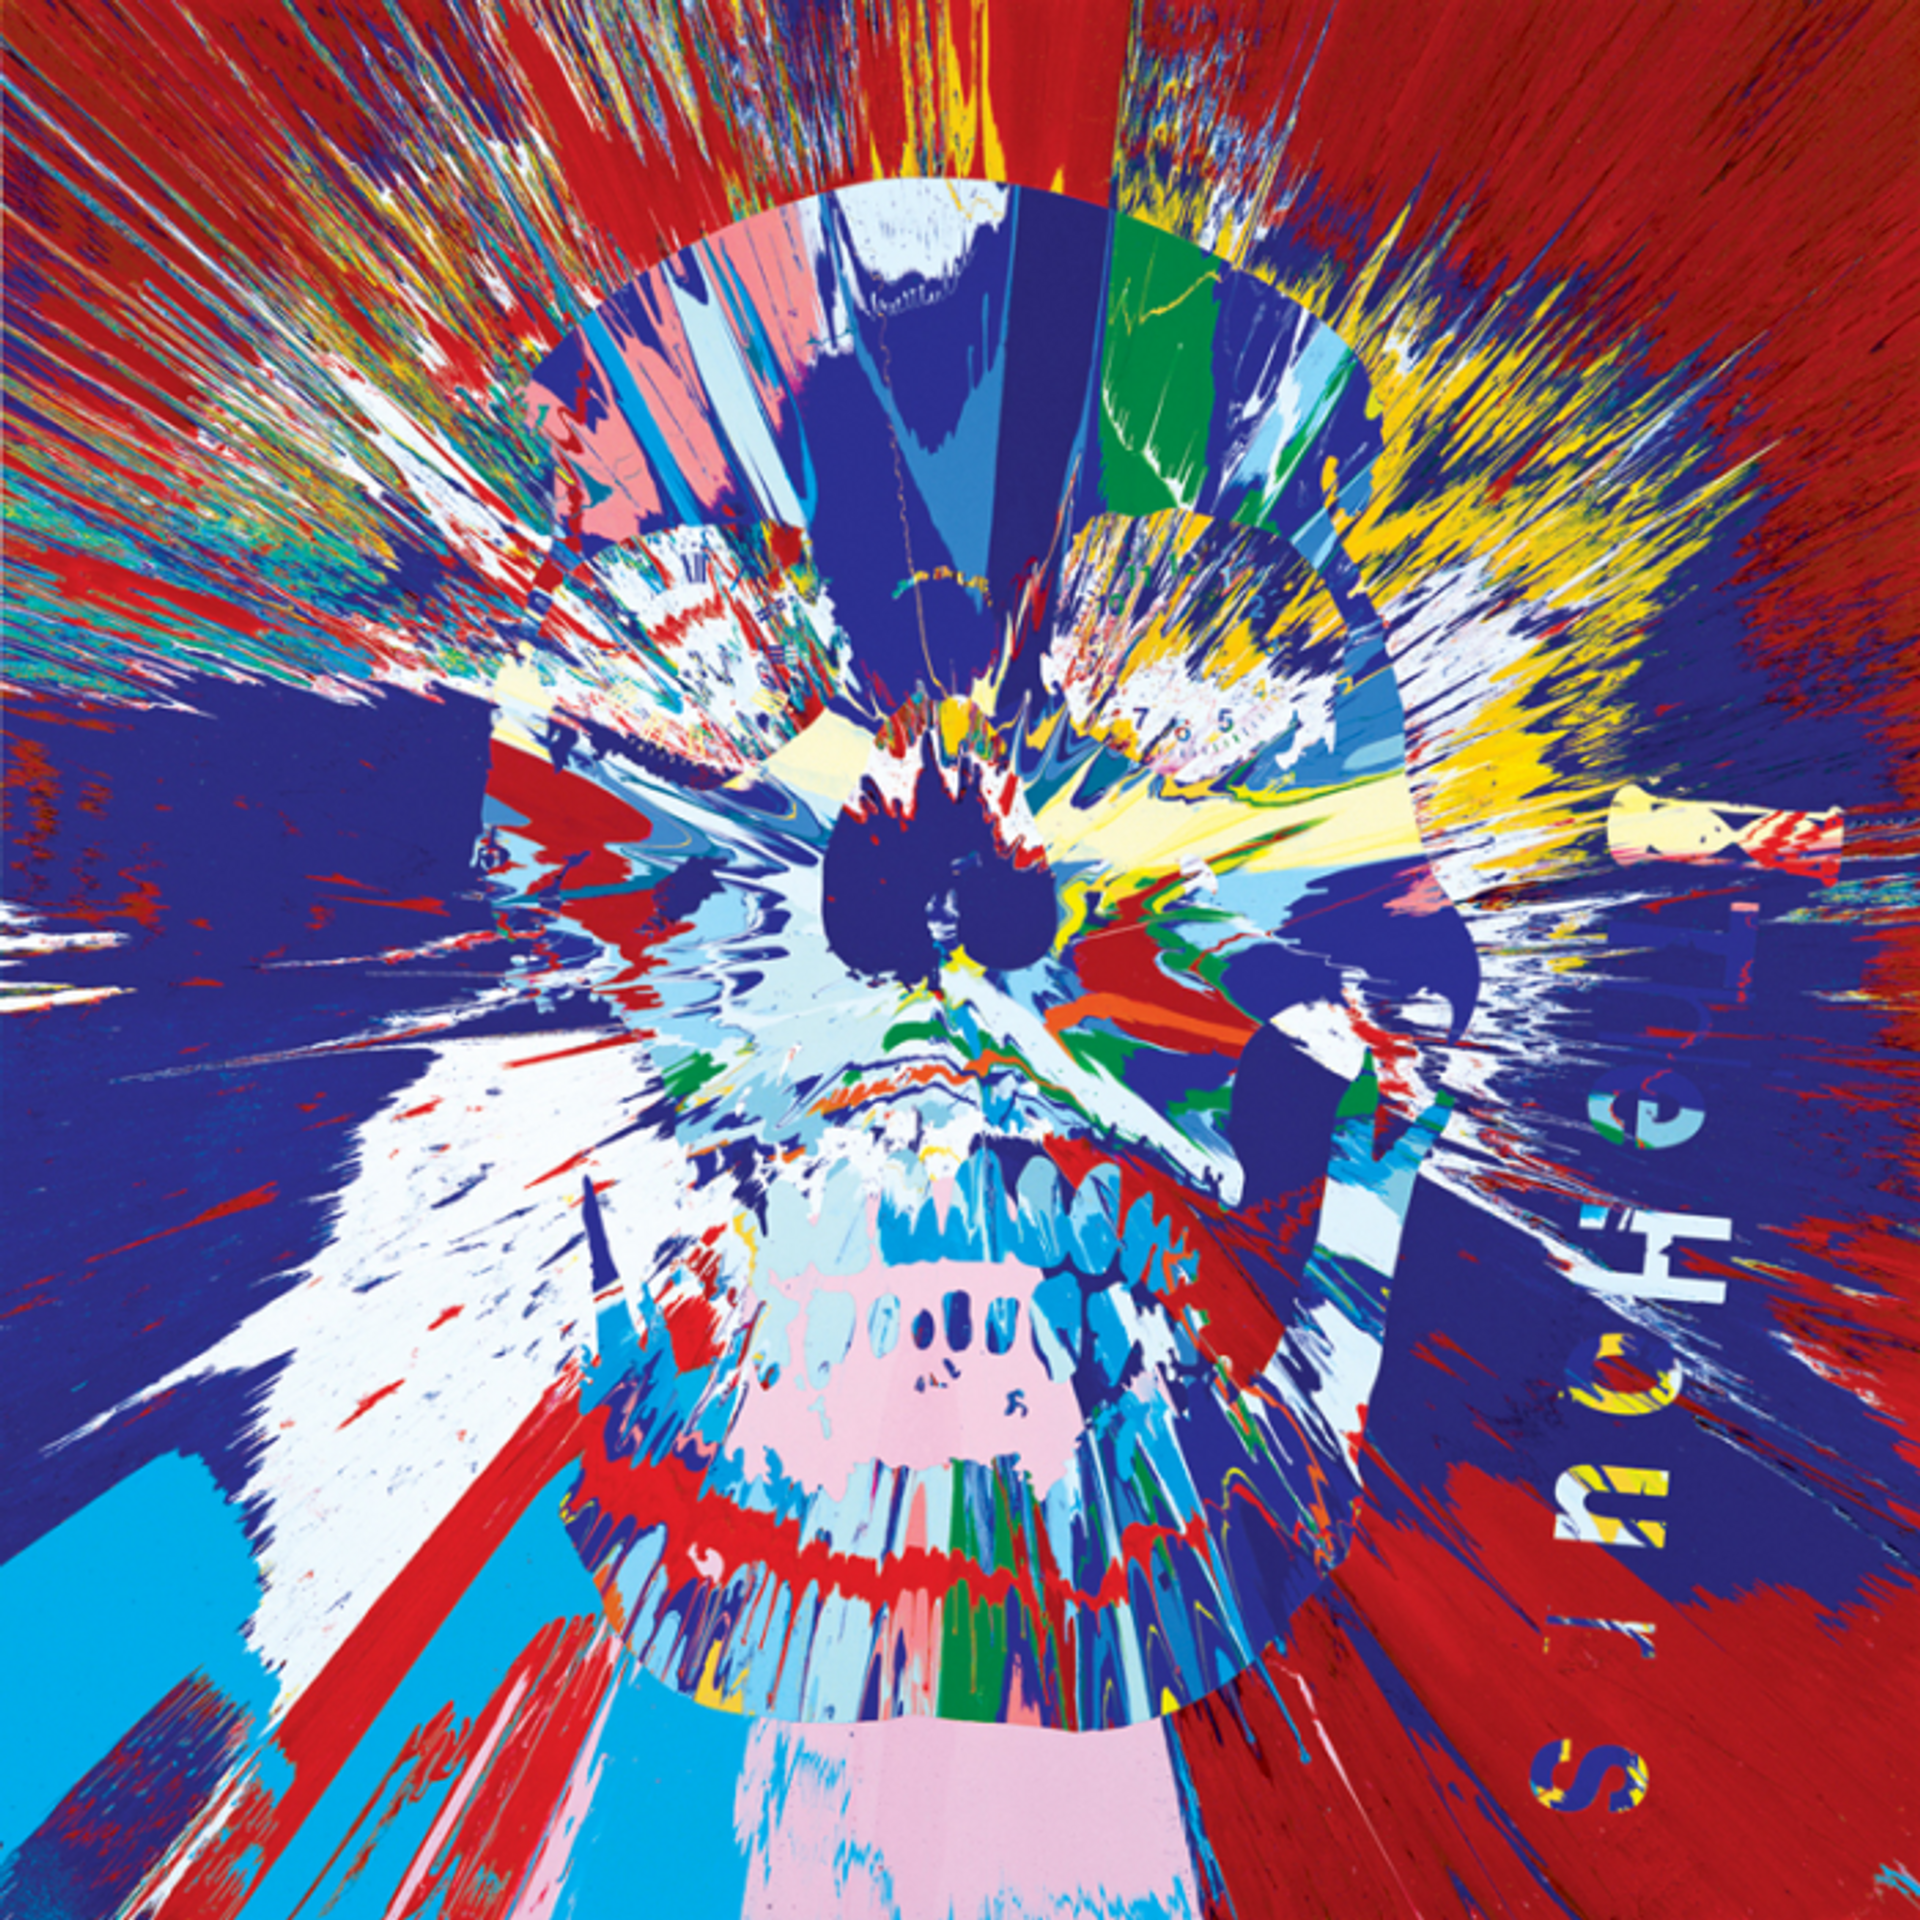 An image of the album cover for See The Light by Damien Hirst, showing a human skull with an intricate design of colourful swirling lines.